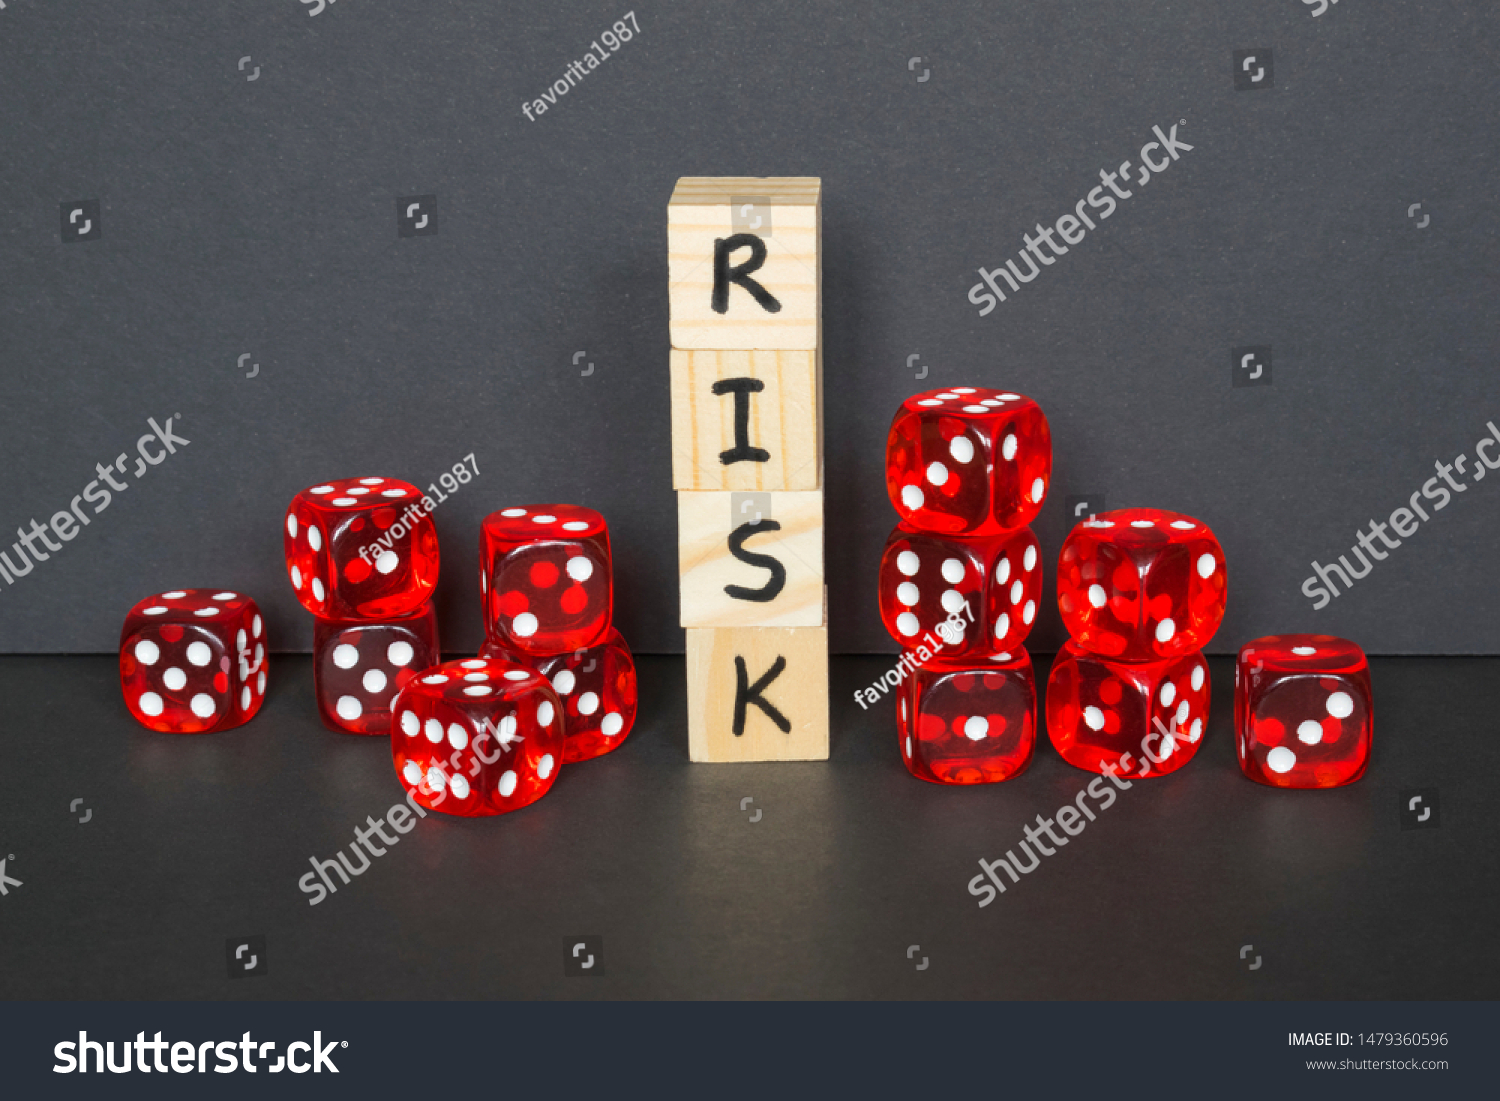 Word Risk written on wooden cubes and red dice on the dark background.  #1479360596